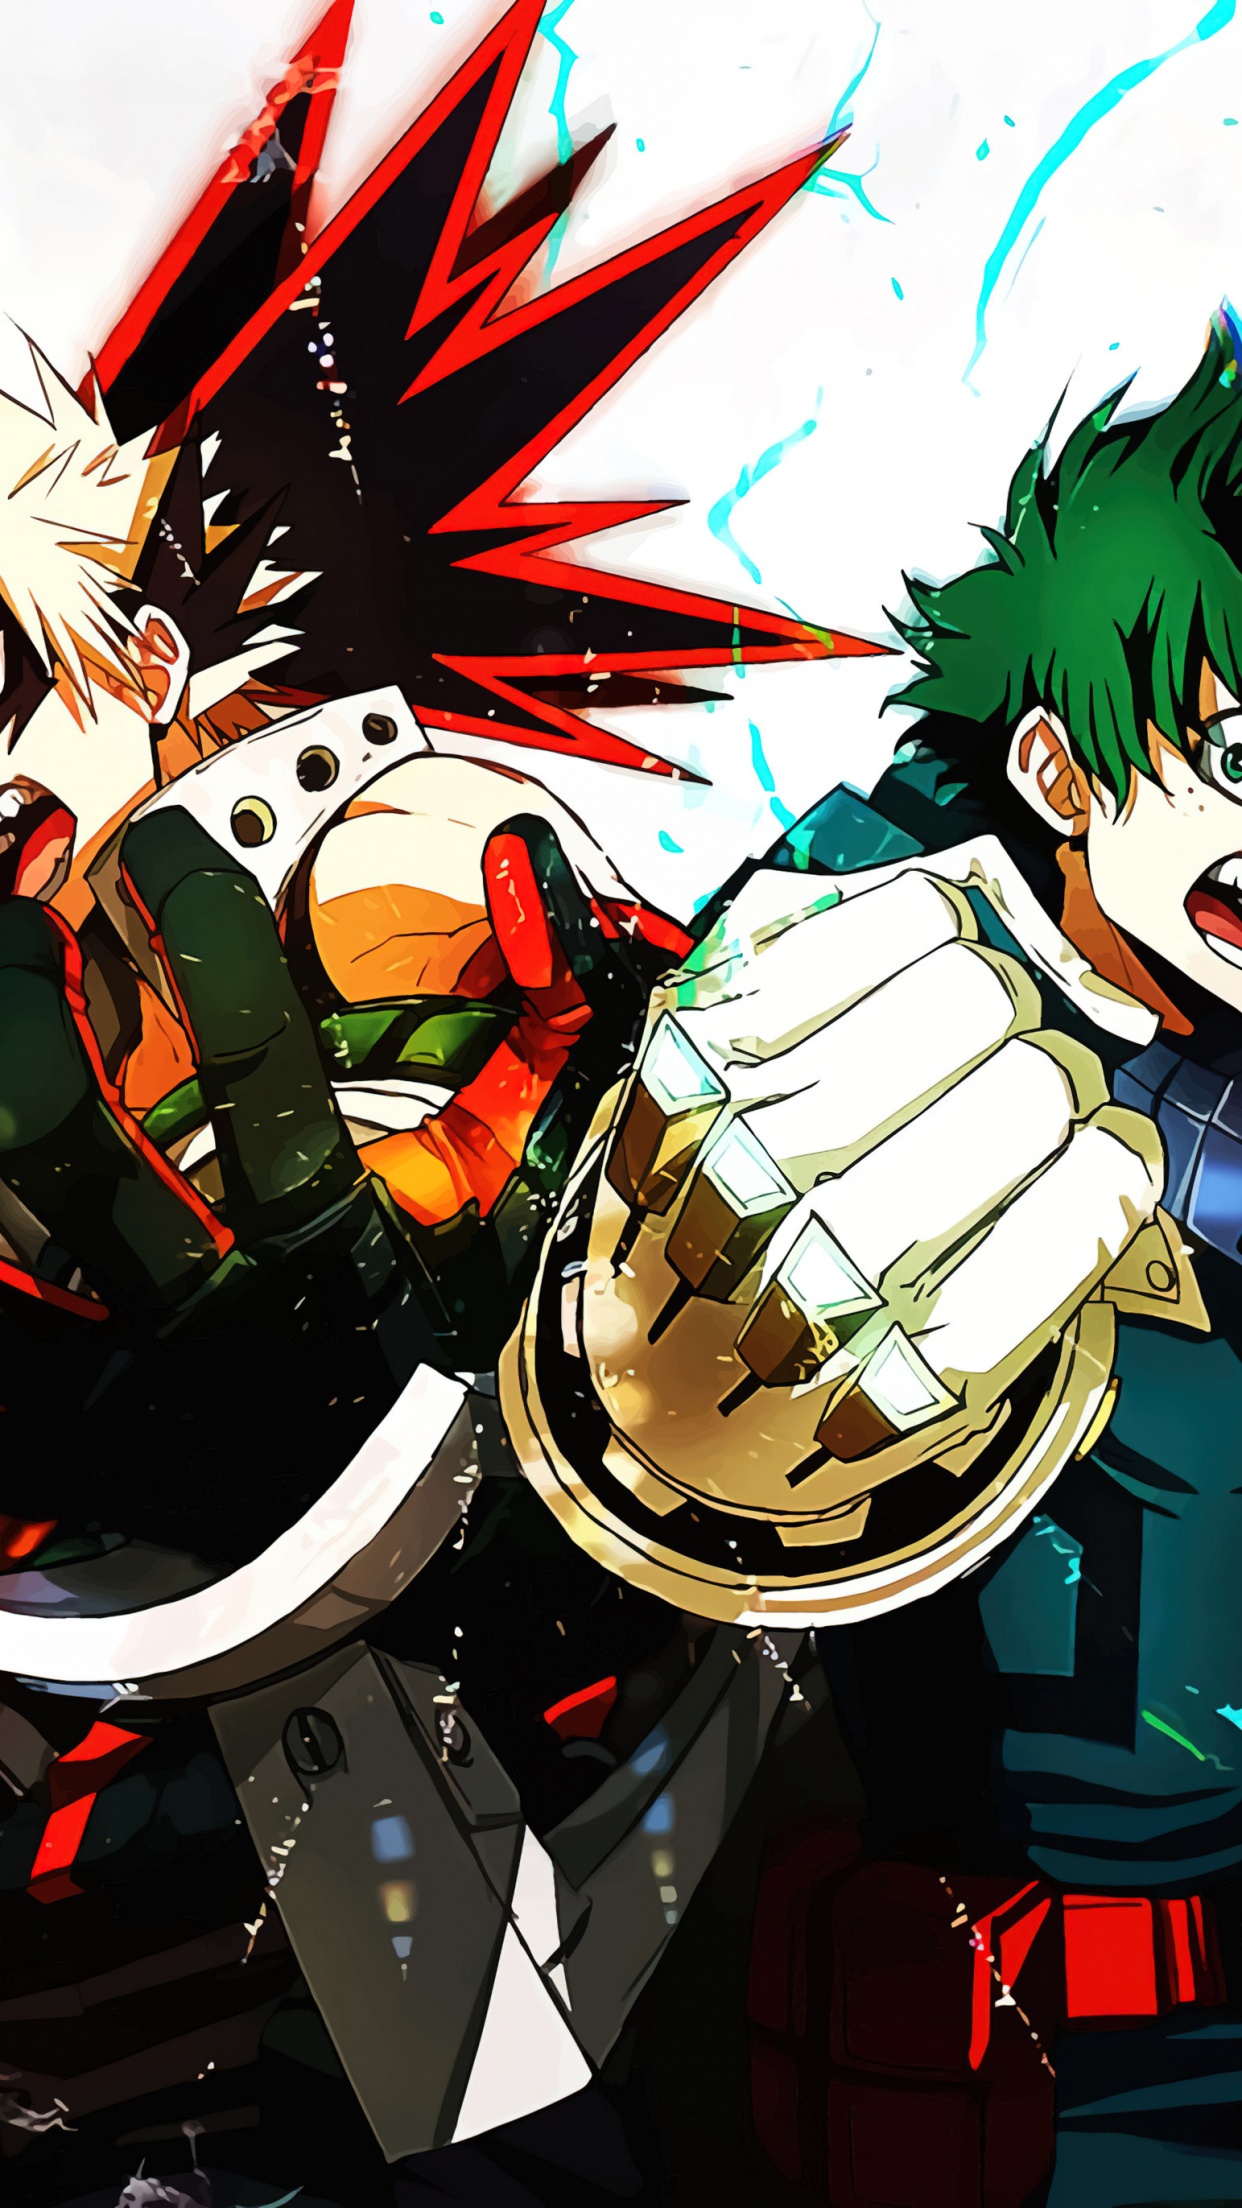 30 My Hero Academia AppleiPhone 11 828x1792 Wallpapers  Mobile Abyss